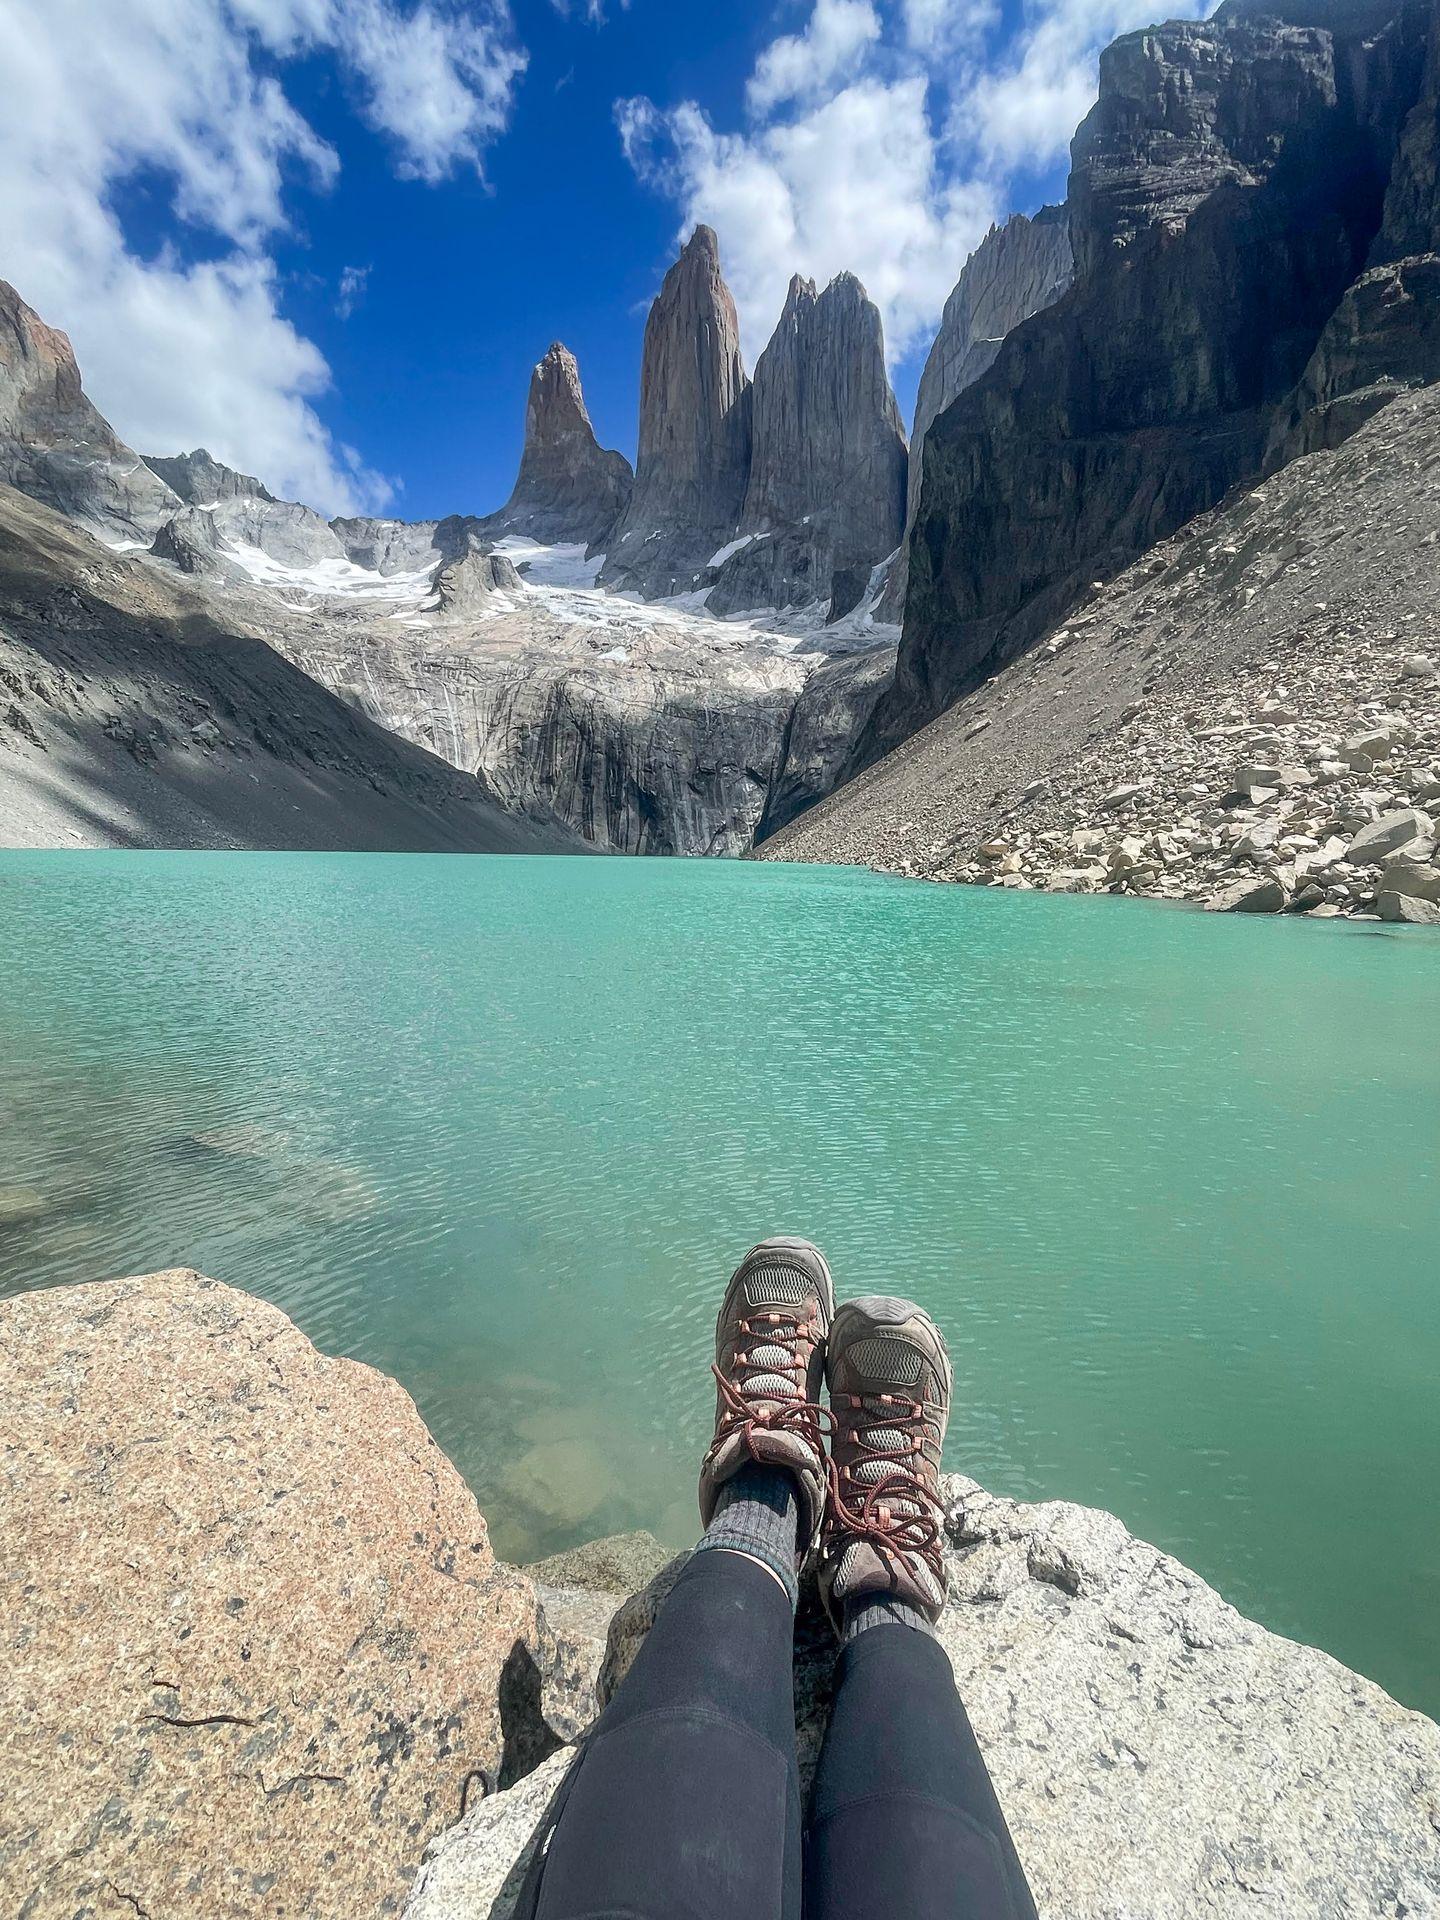 A view of Lydia wearing Merrell hiking boots with Mirador Las Torres in the background.